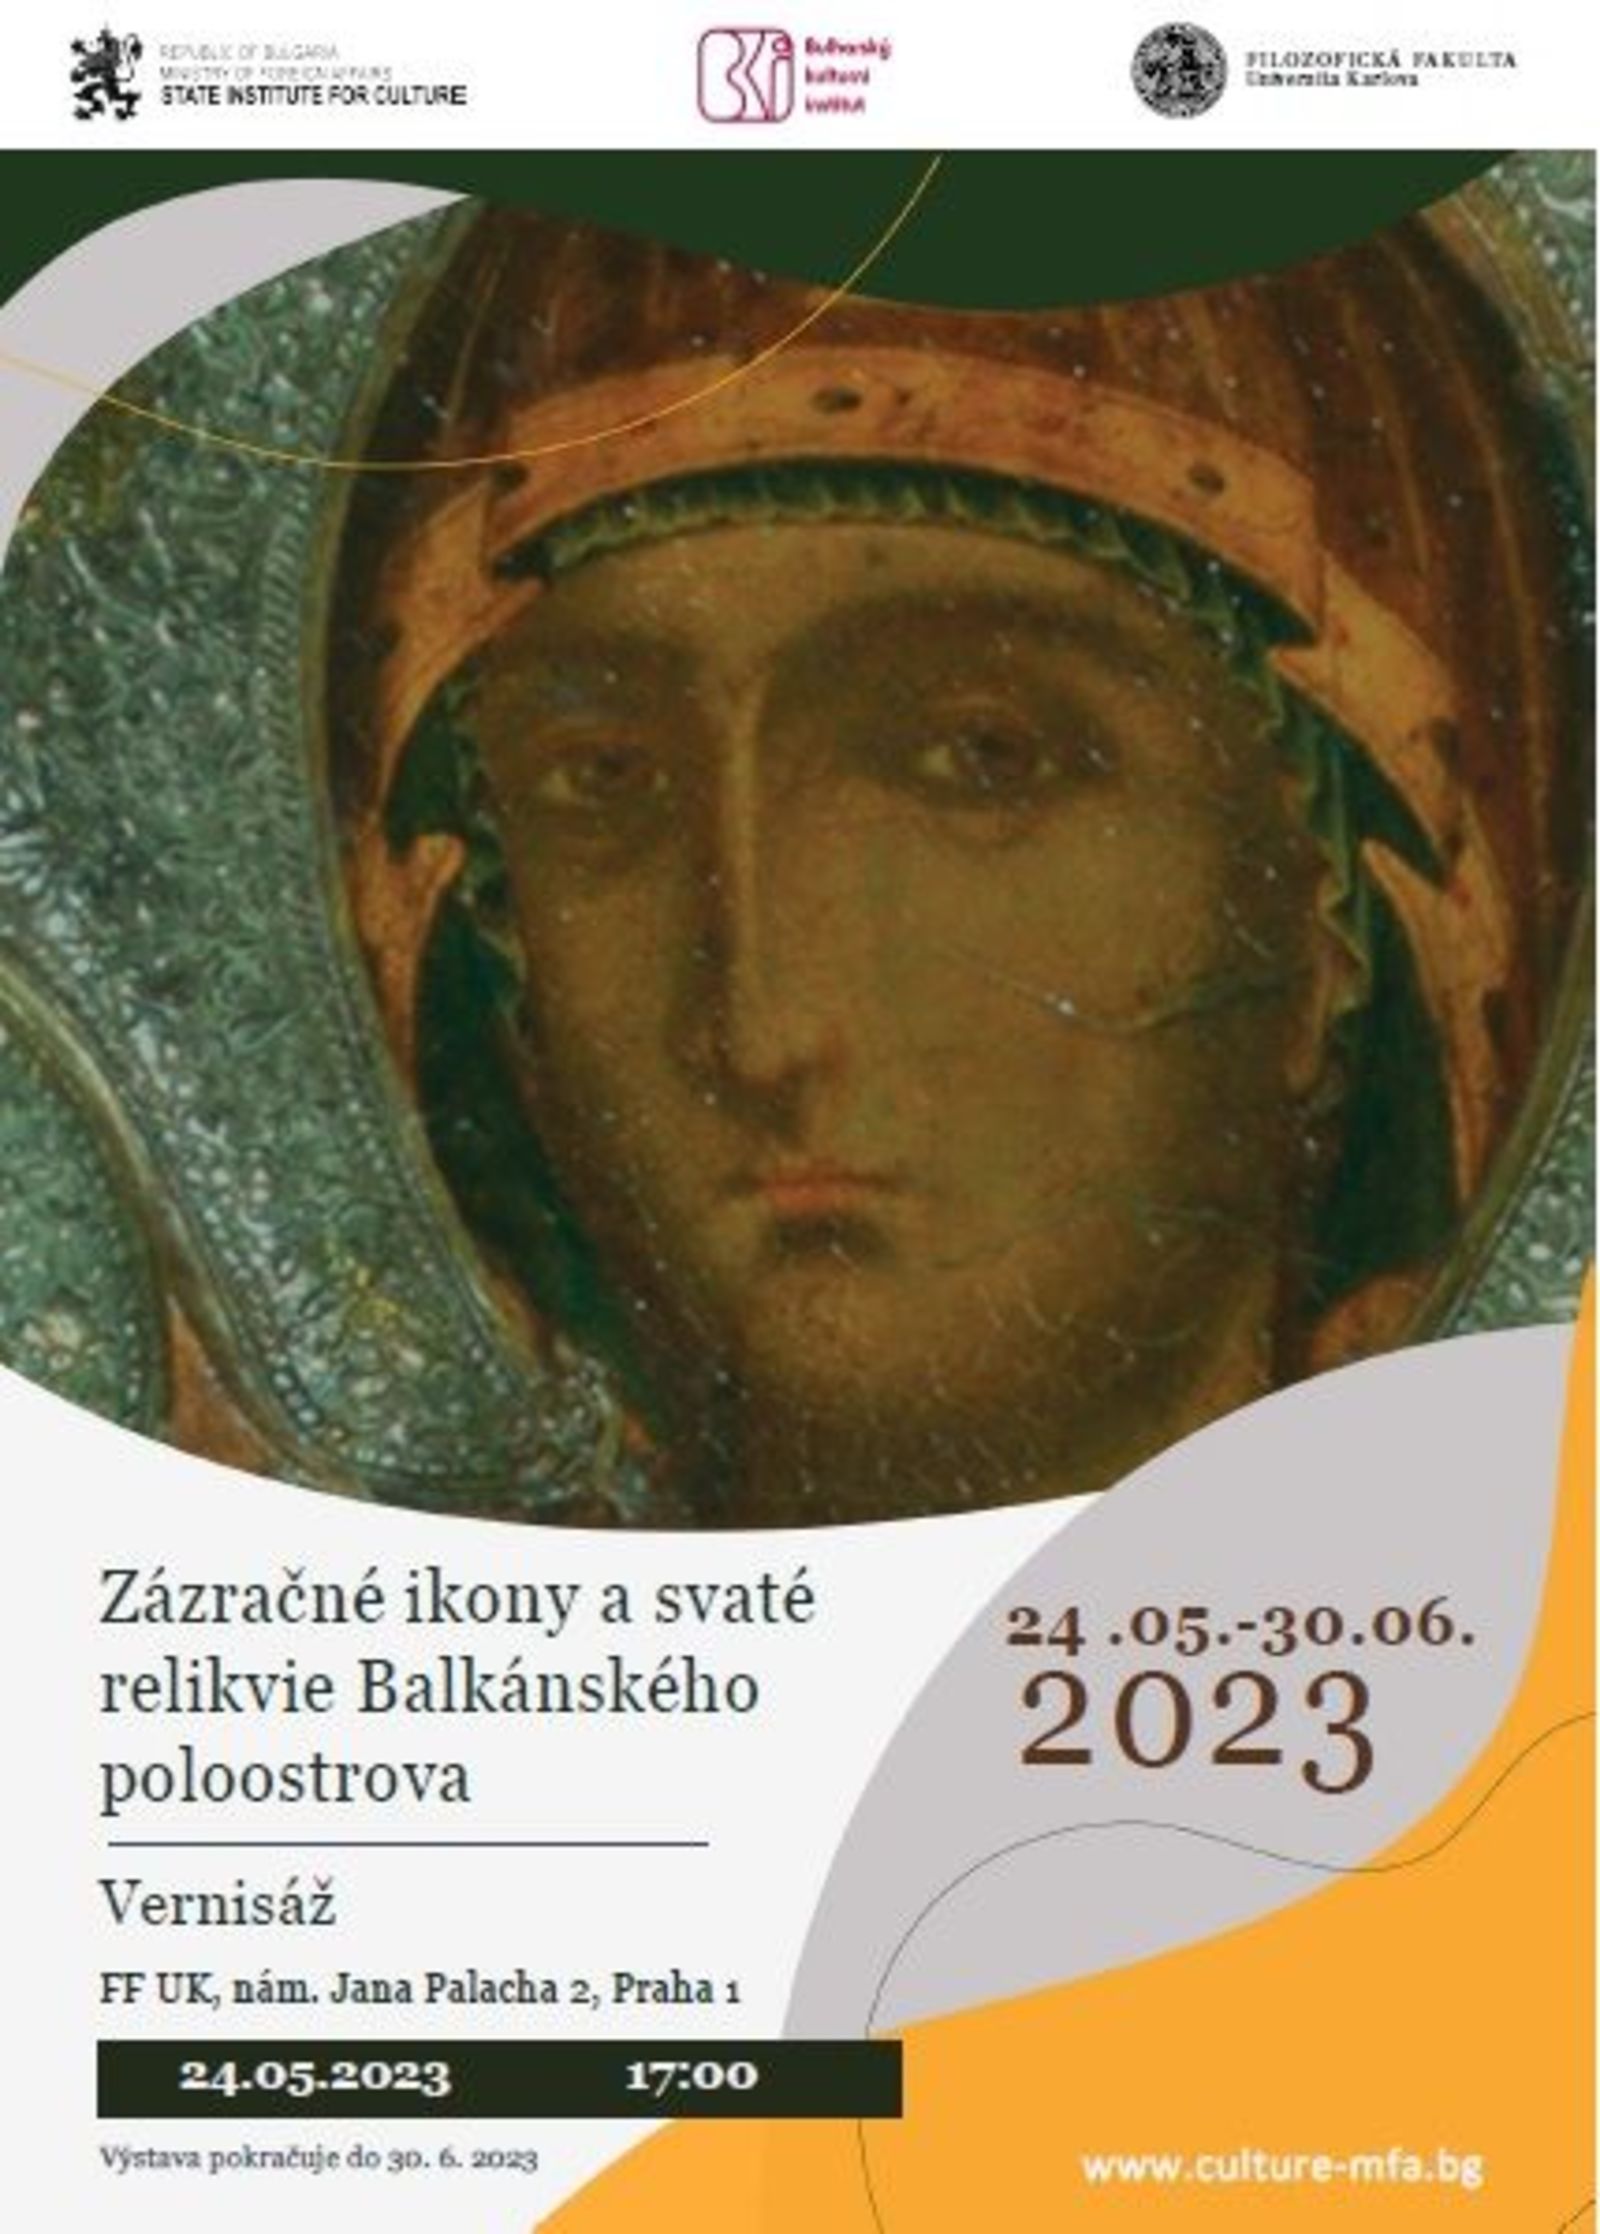 Official opening of the exhibition "Miracle Icons and Holy Relics of the Balkans" at the Charles University - Prague